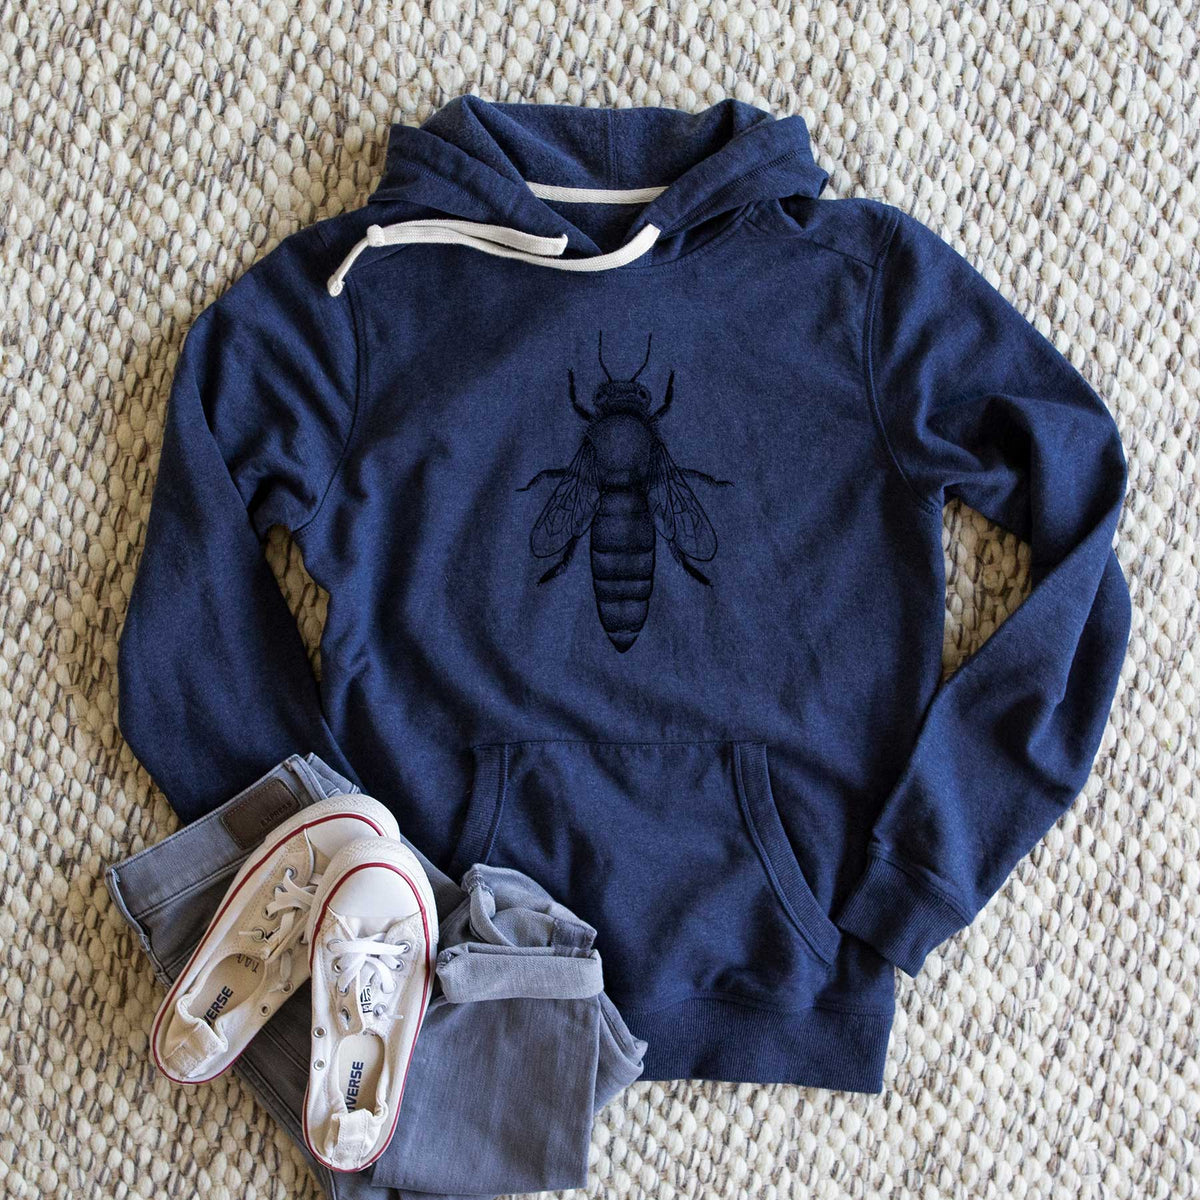 Queen Bee Apis Mellifera - Unisex Recycled Hoodie - CLOSEOUT - FINAL SALE